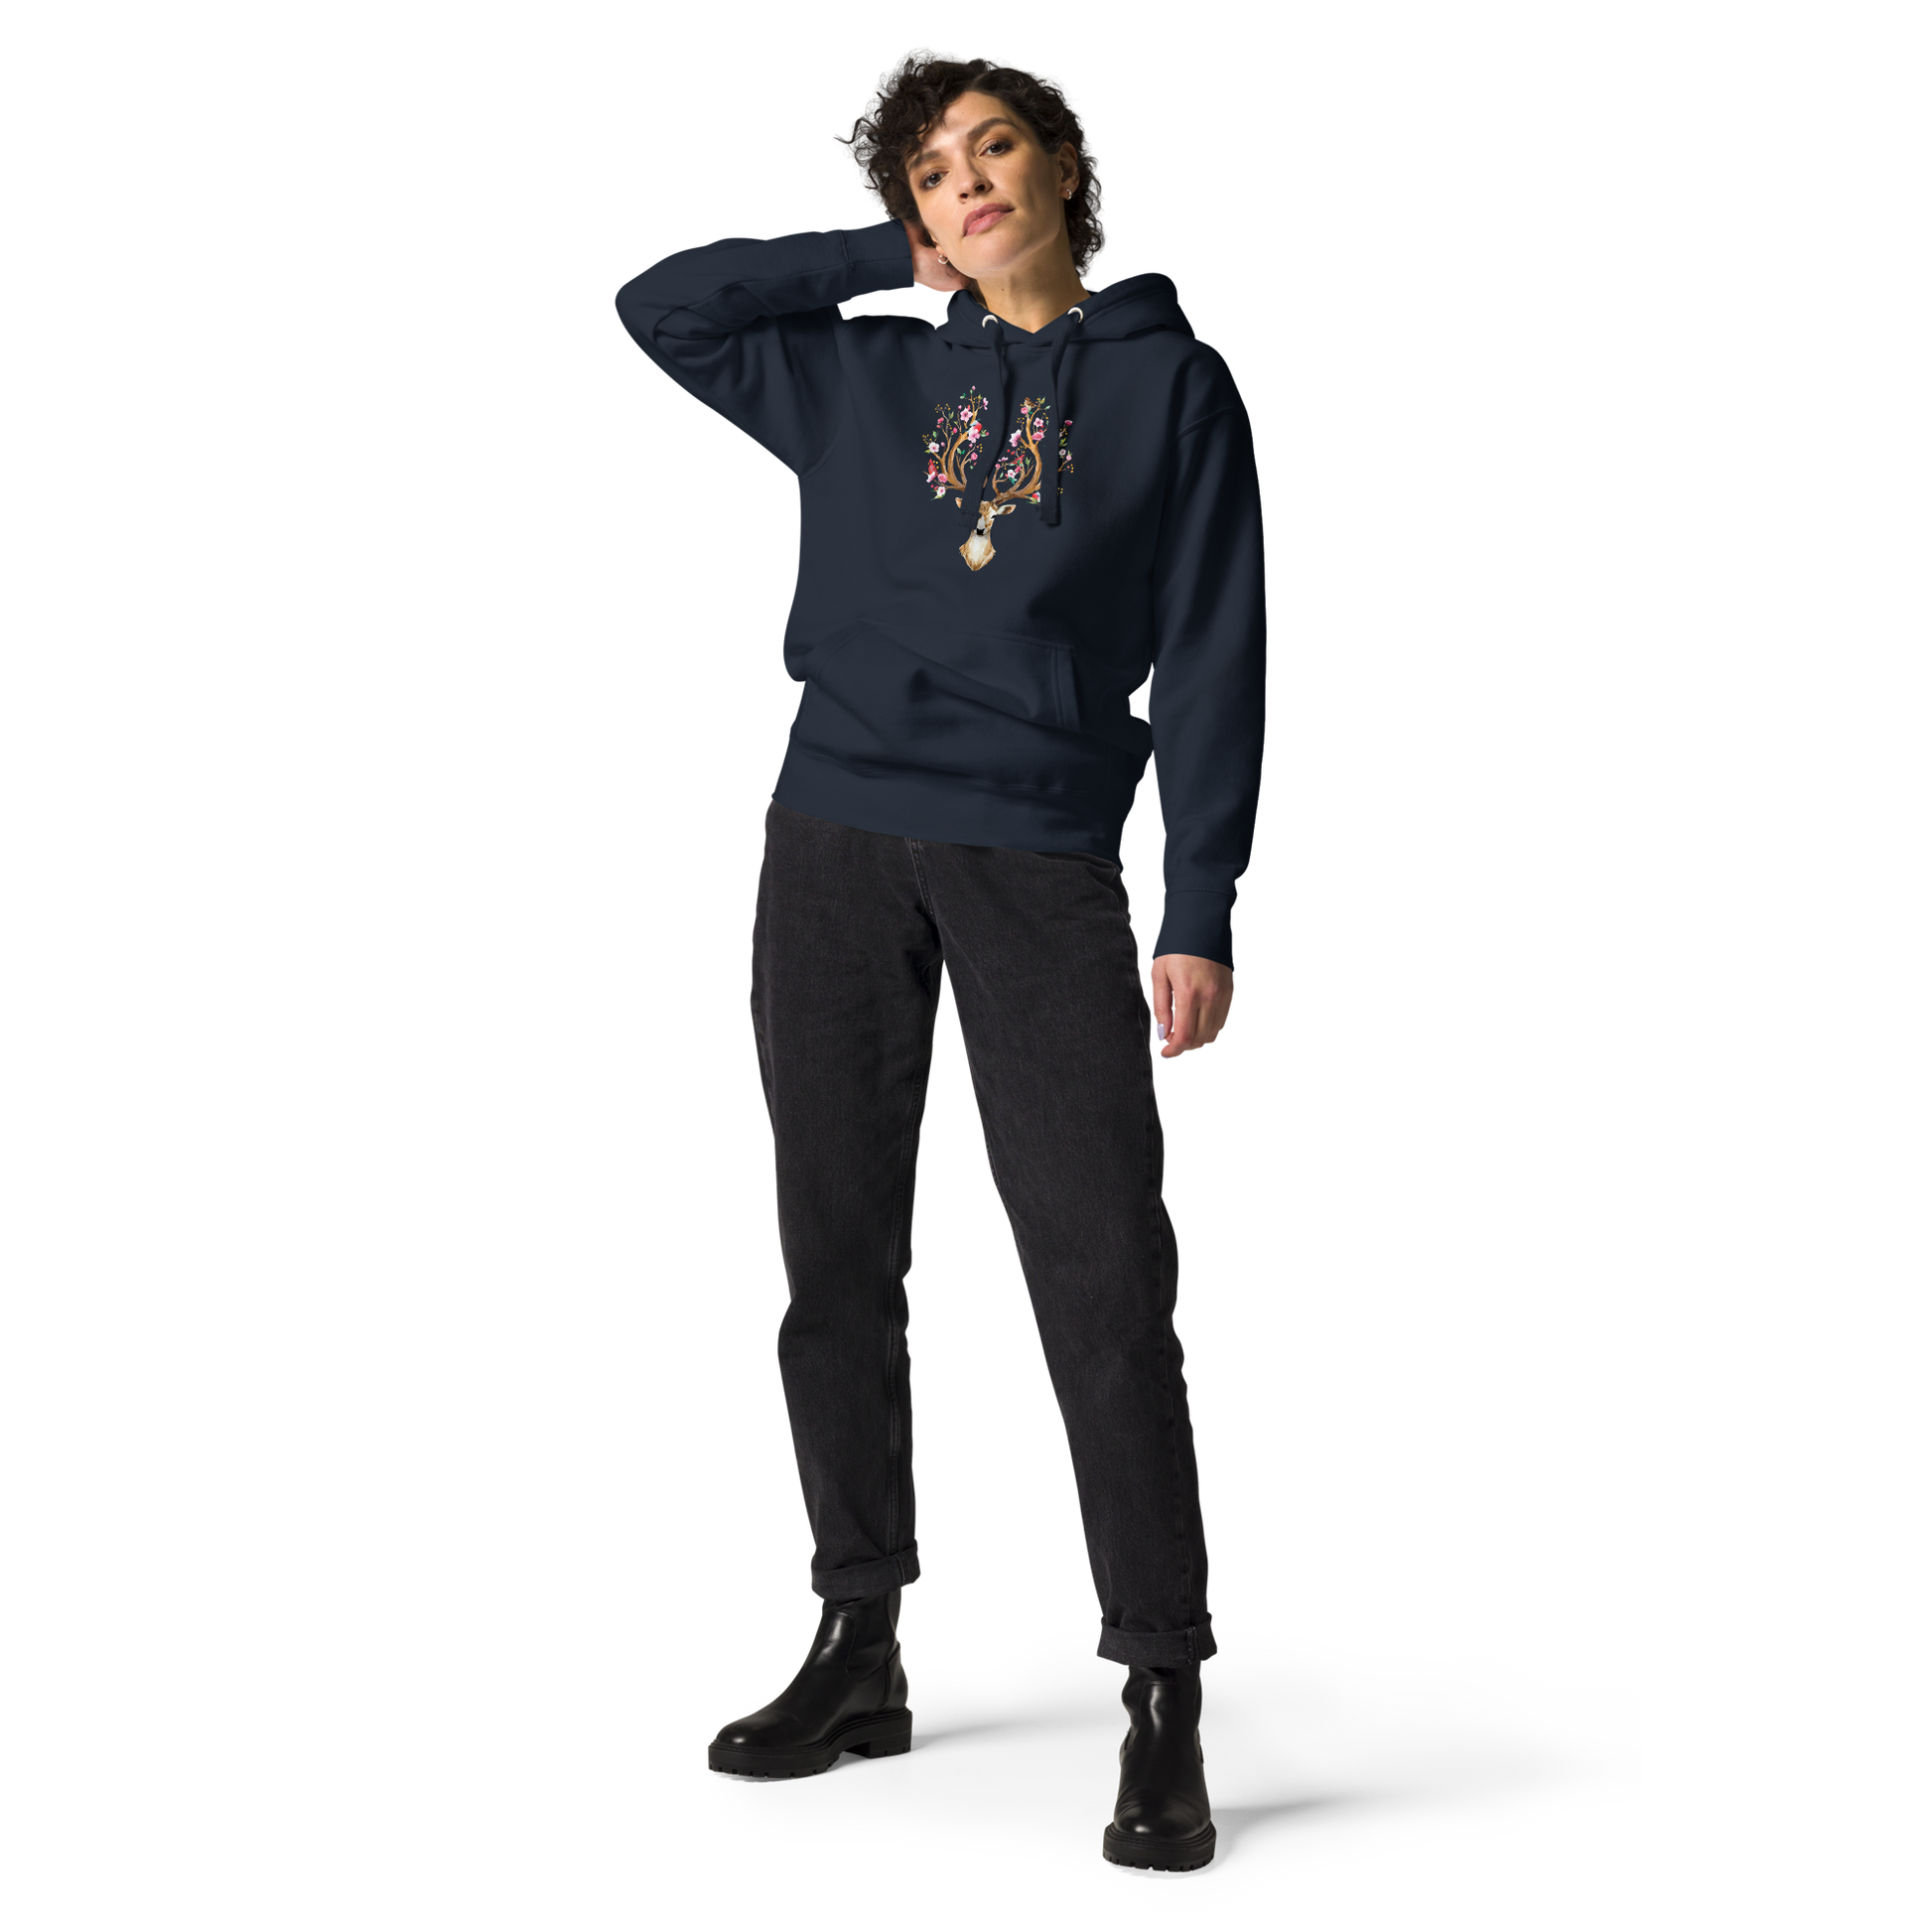 Smiling woman wearing a Navy Blazer Premium Floral Red Deer Hoodie featuring a captivating Floral Red Deer graphic on the chest - Cute Graphic Deer Hoodies - Boozy Fox